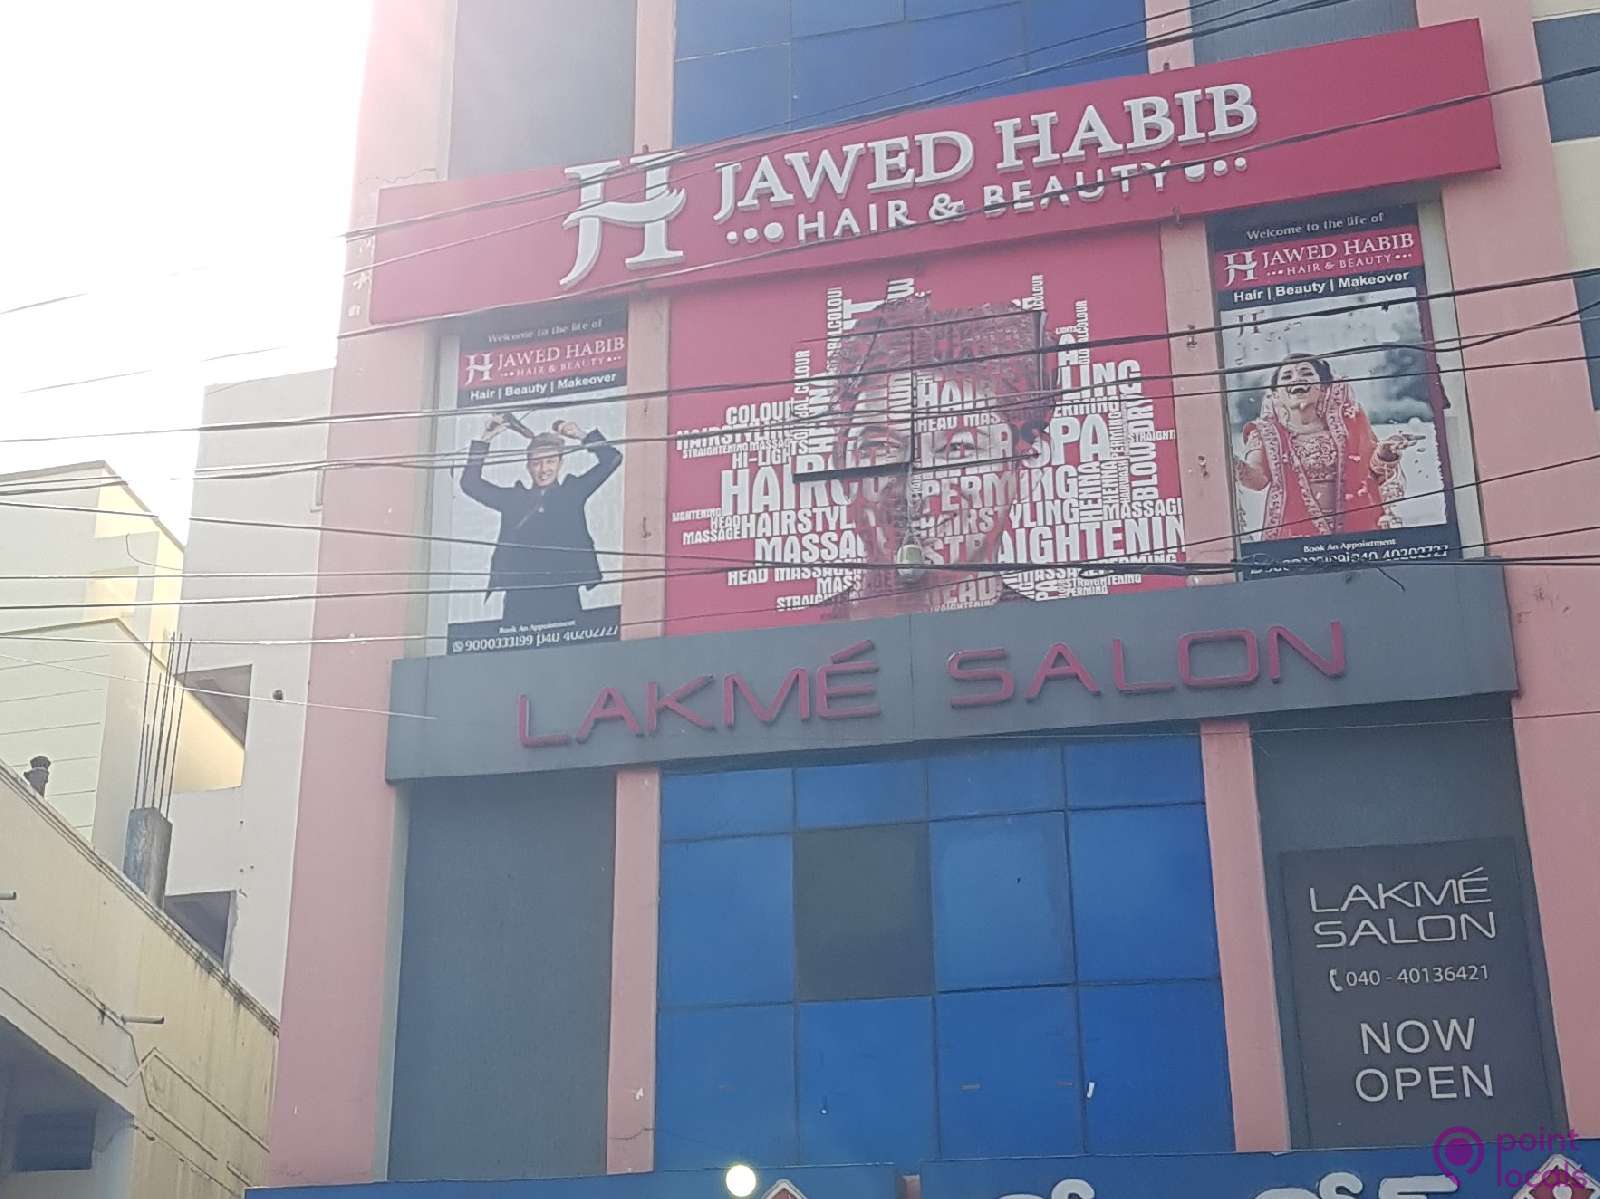 Jawed Habib Hair and Beauty Salon - Jawed Habib Hair and Beauty in Near  9C9H+GQ Hyderabad,Telangana | Pointlocals